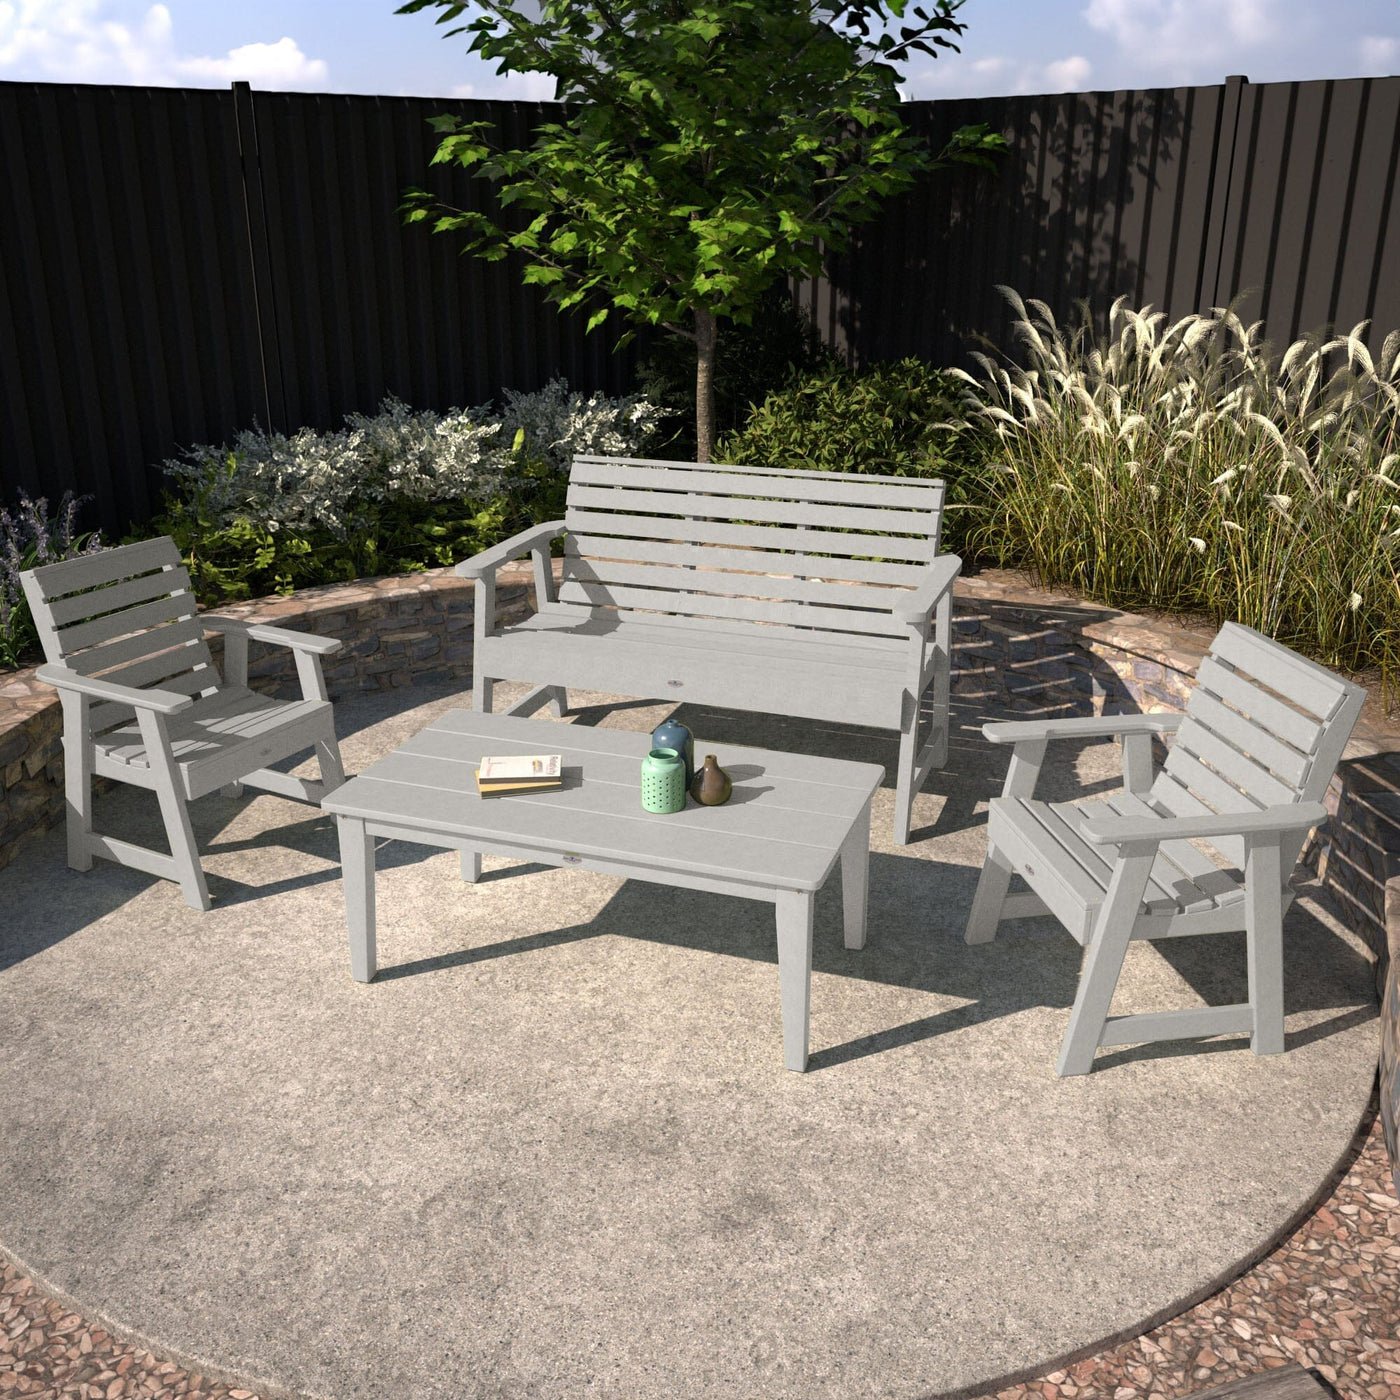 Riverside Garden Bench 4ft, 2 Garden Chairs, and Conversation Table Set Kitted Set Bahia Verde Outdoors 